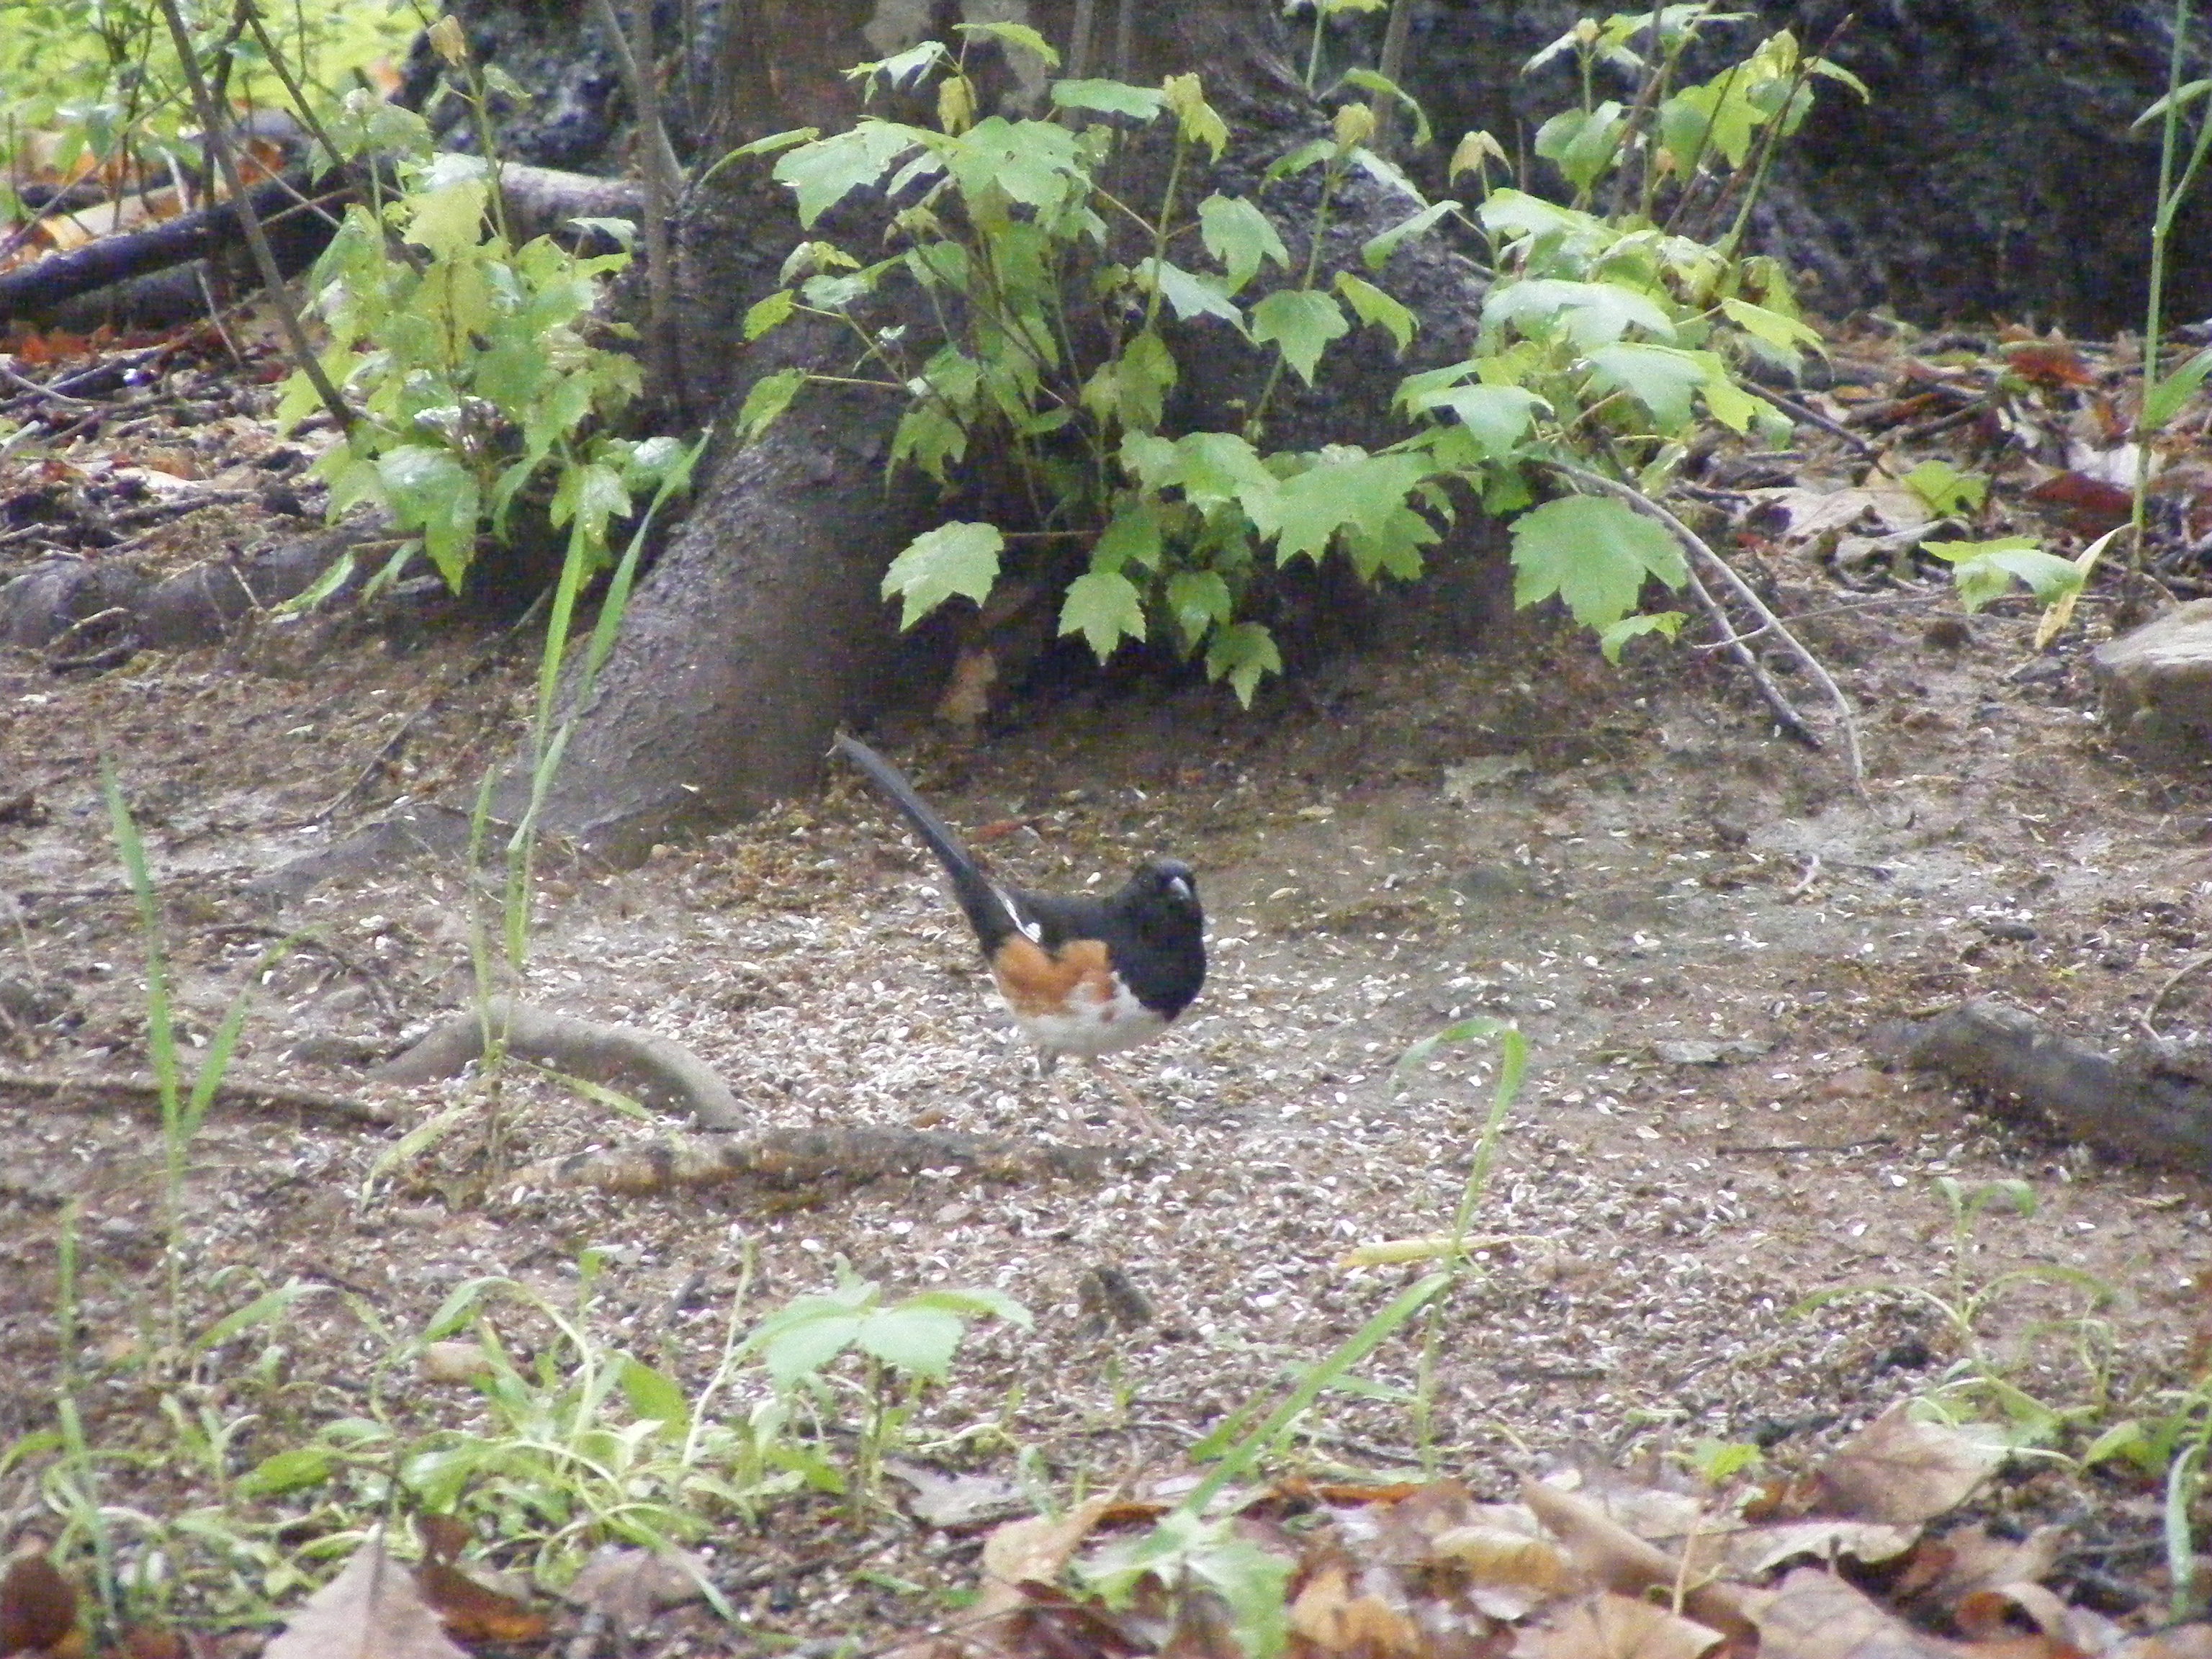 Rufous Sided Towhee - another delightful surprise and first-time sighting for us this spring!